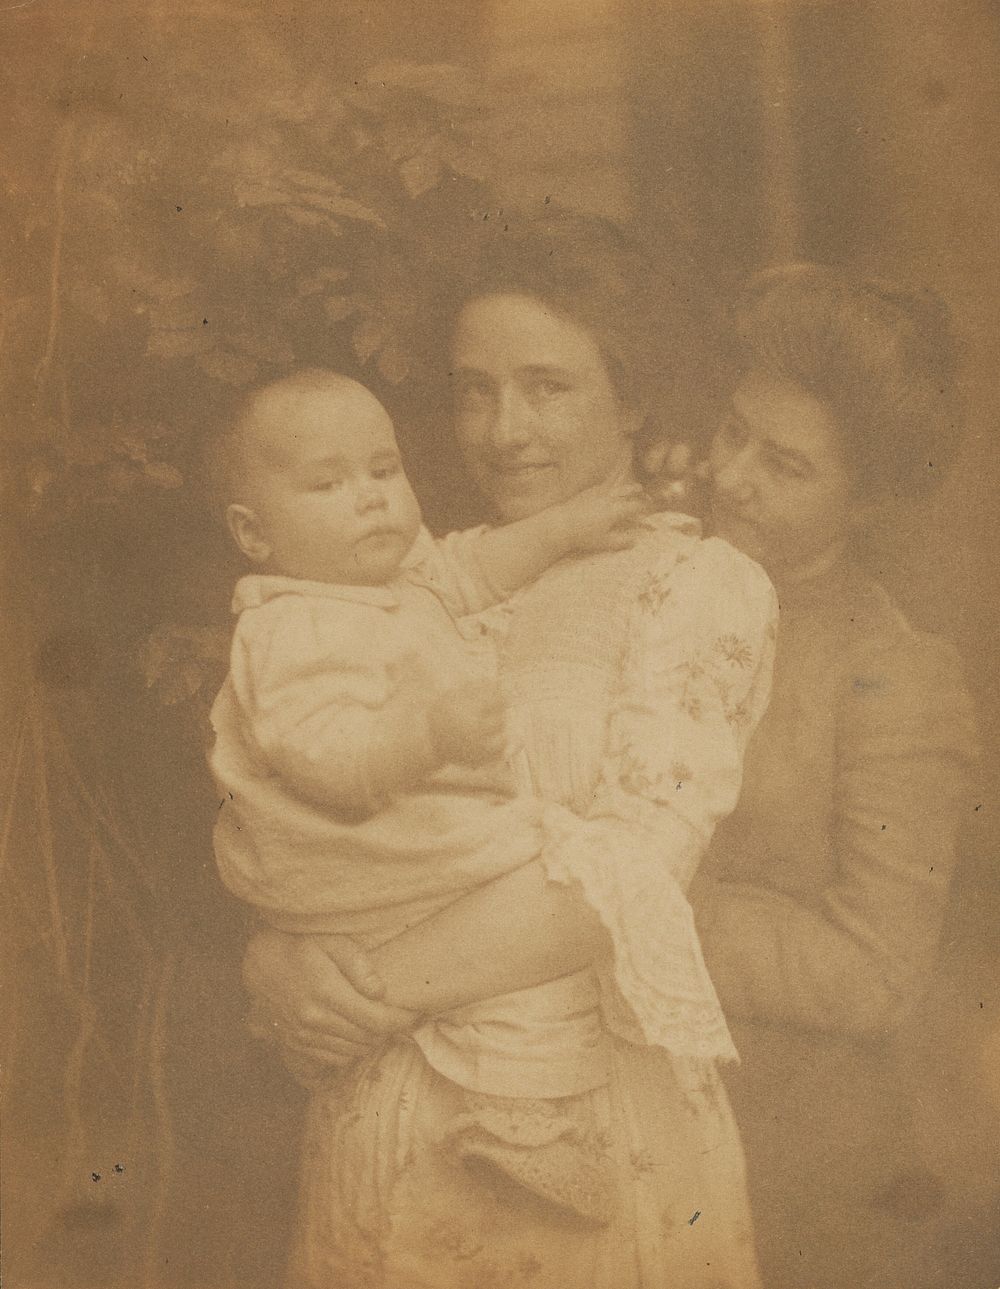 Gertrude O'Malley holding Charles, flanked by her sister Hermine by Gertrude Käsebier